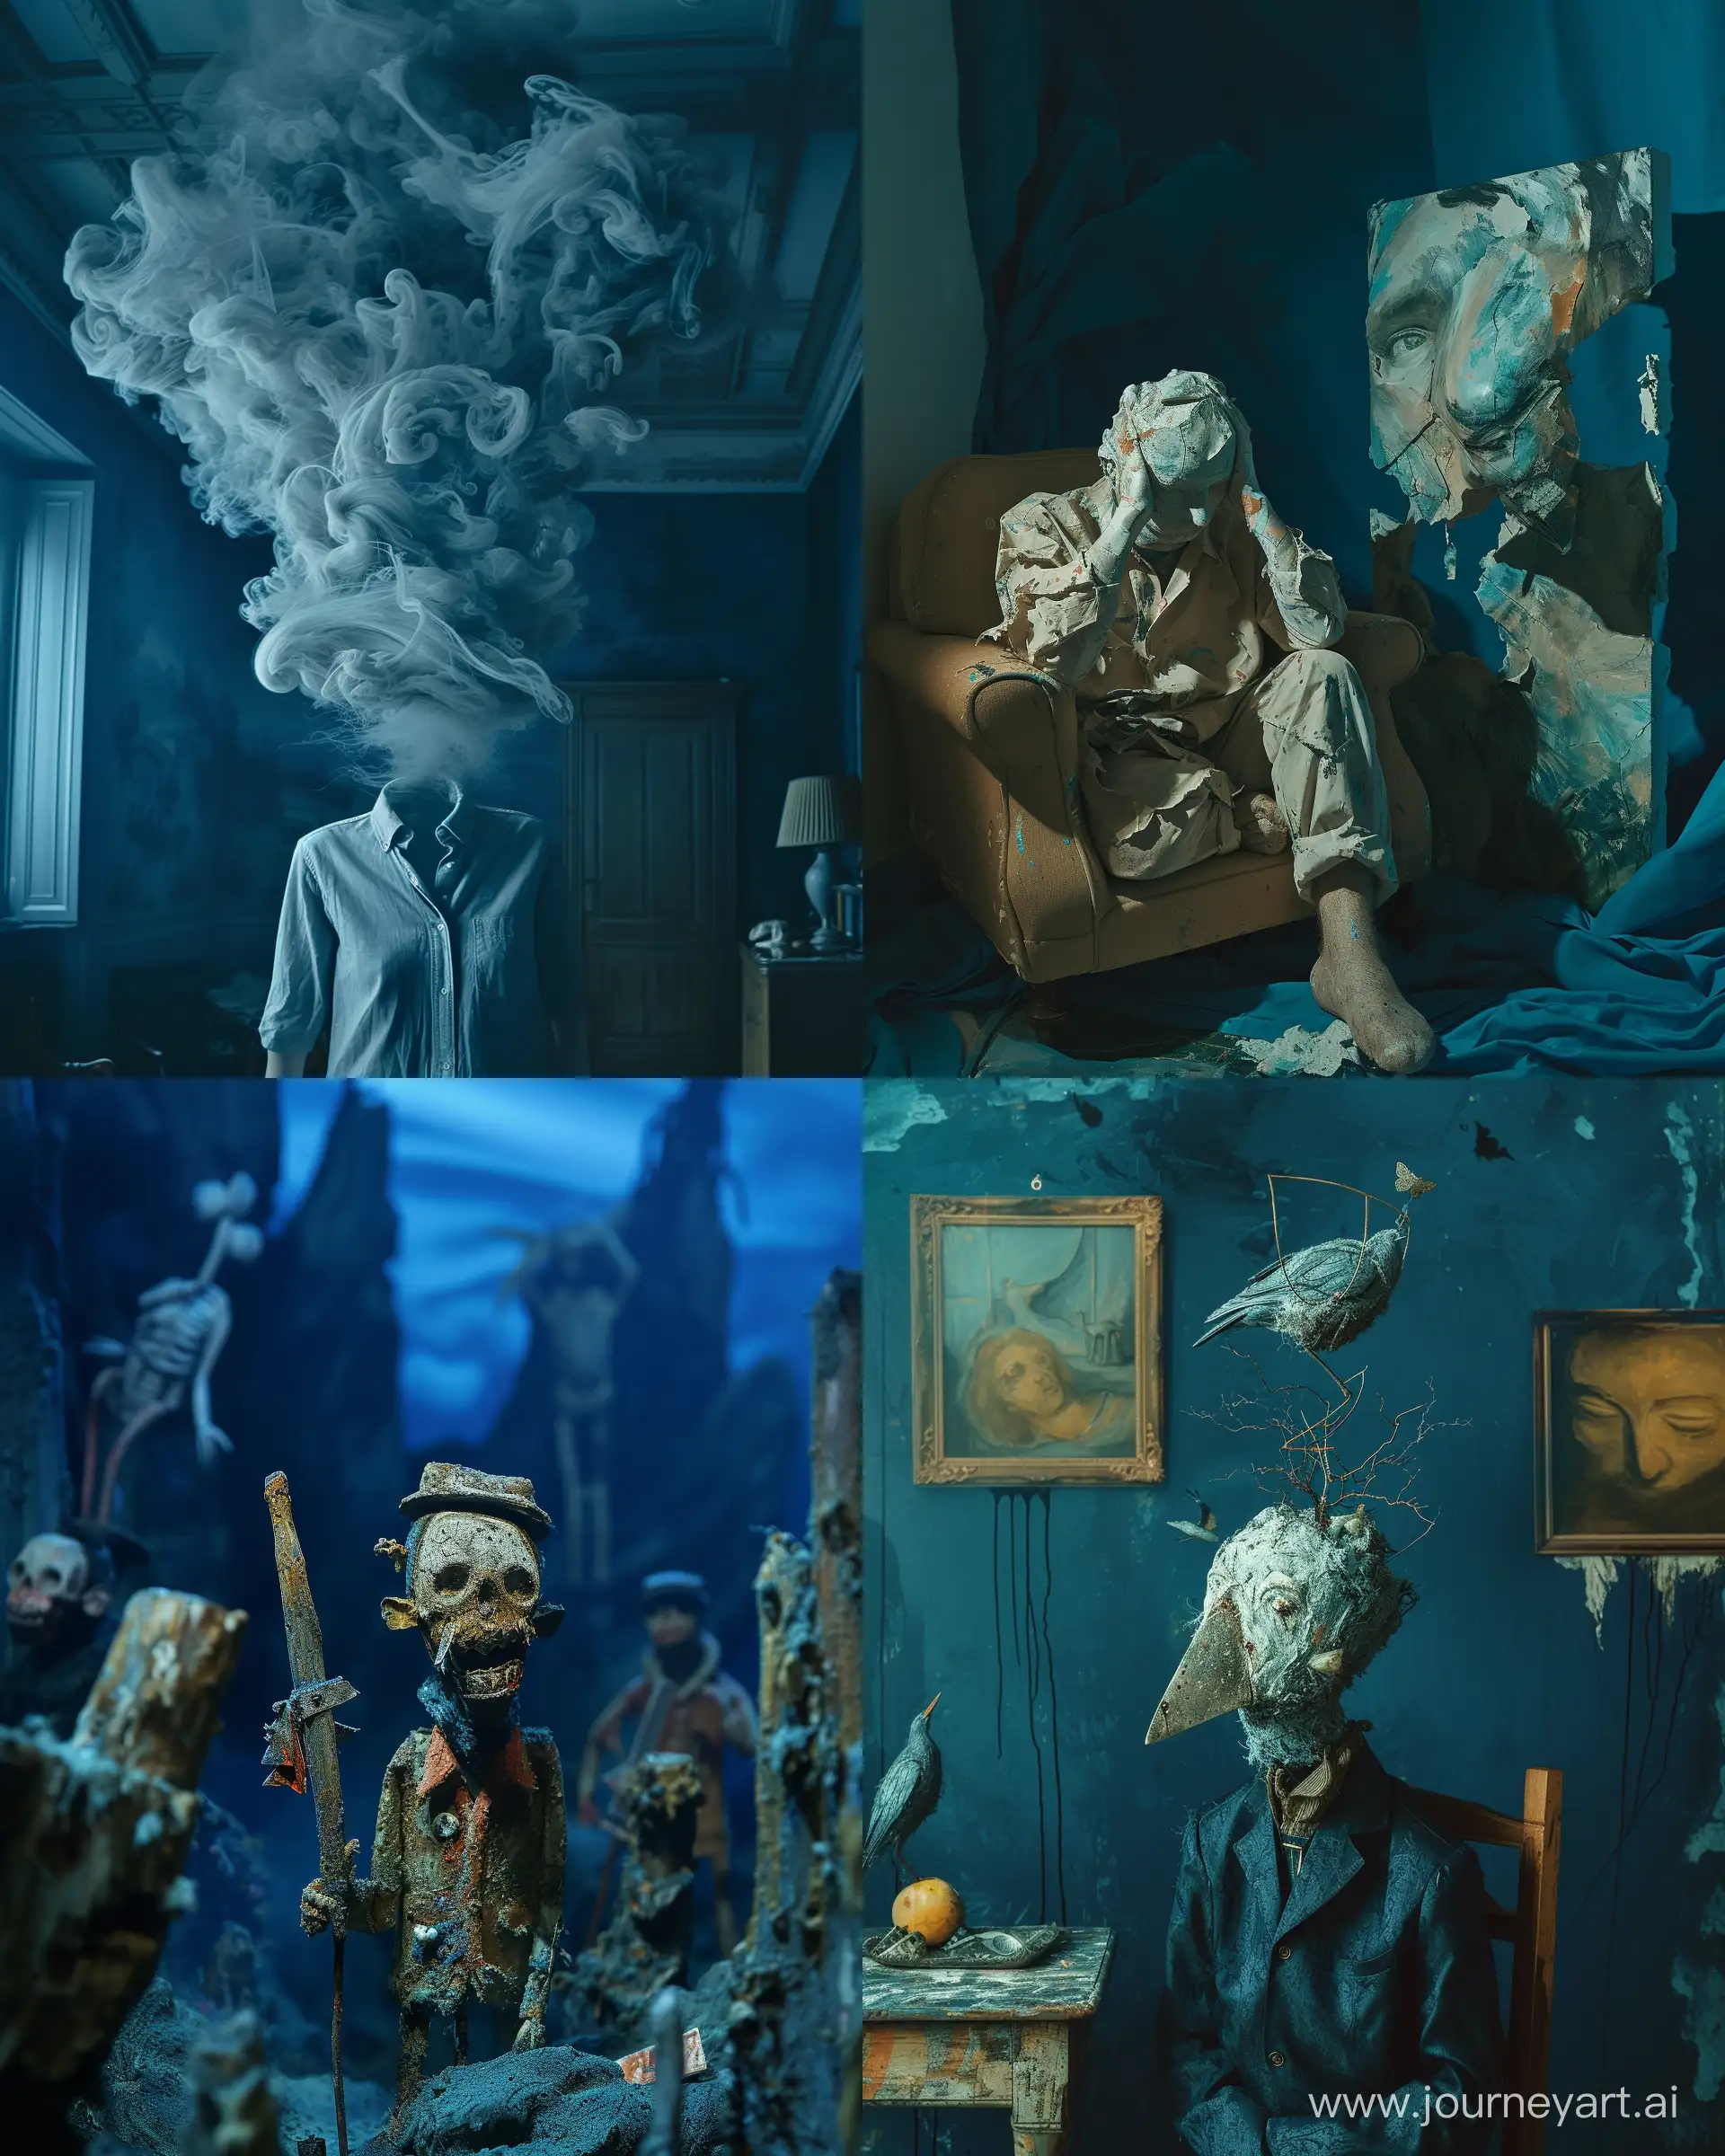 Surrealistic-Staged-Photography-Absurd-Art-Inspired-by-Pablo-Picasso-in-Dark-Blue-Atmosphere